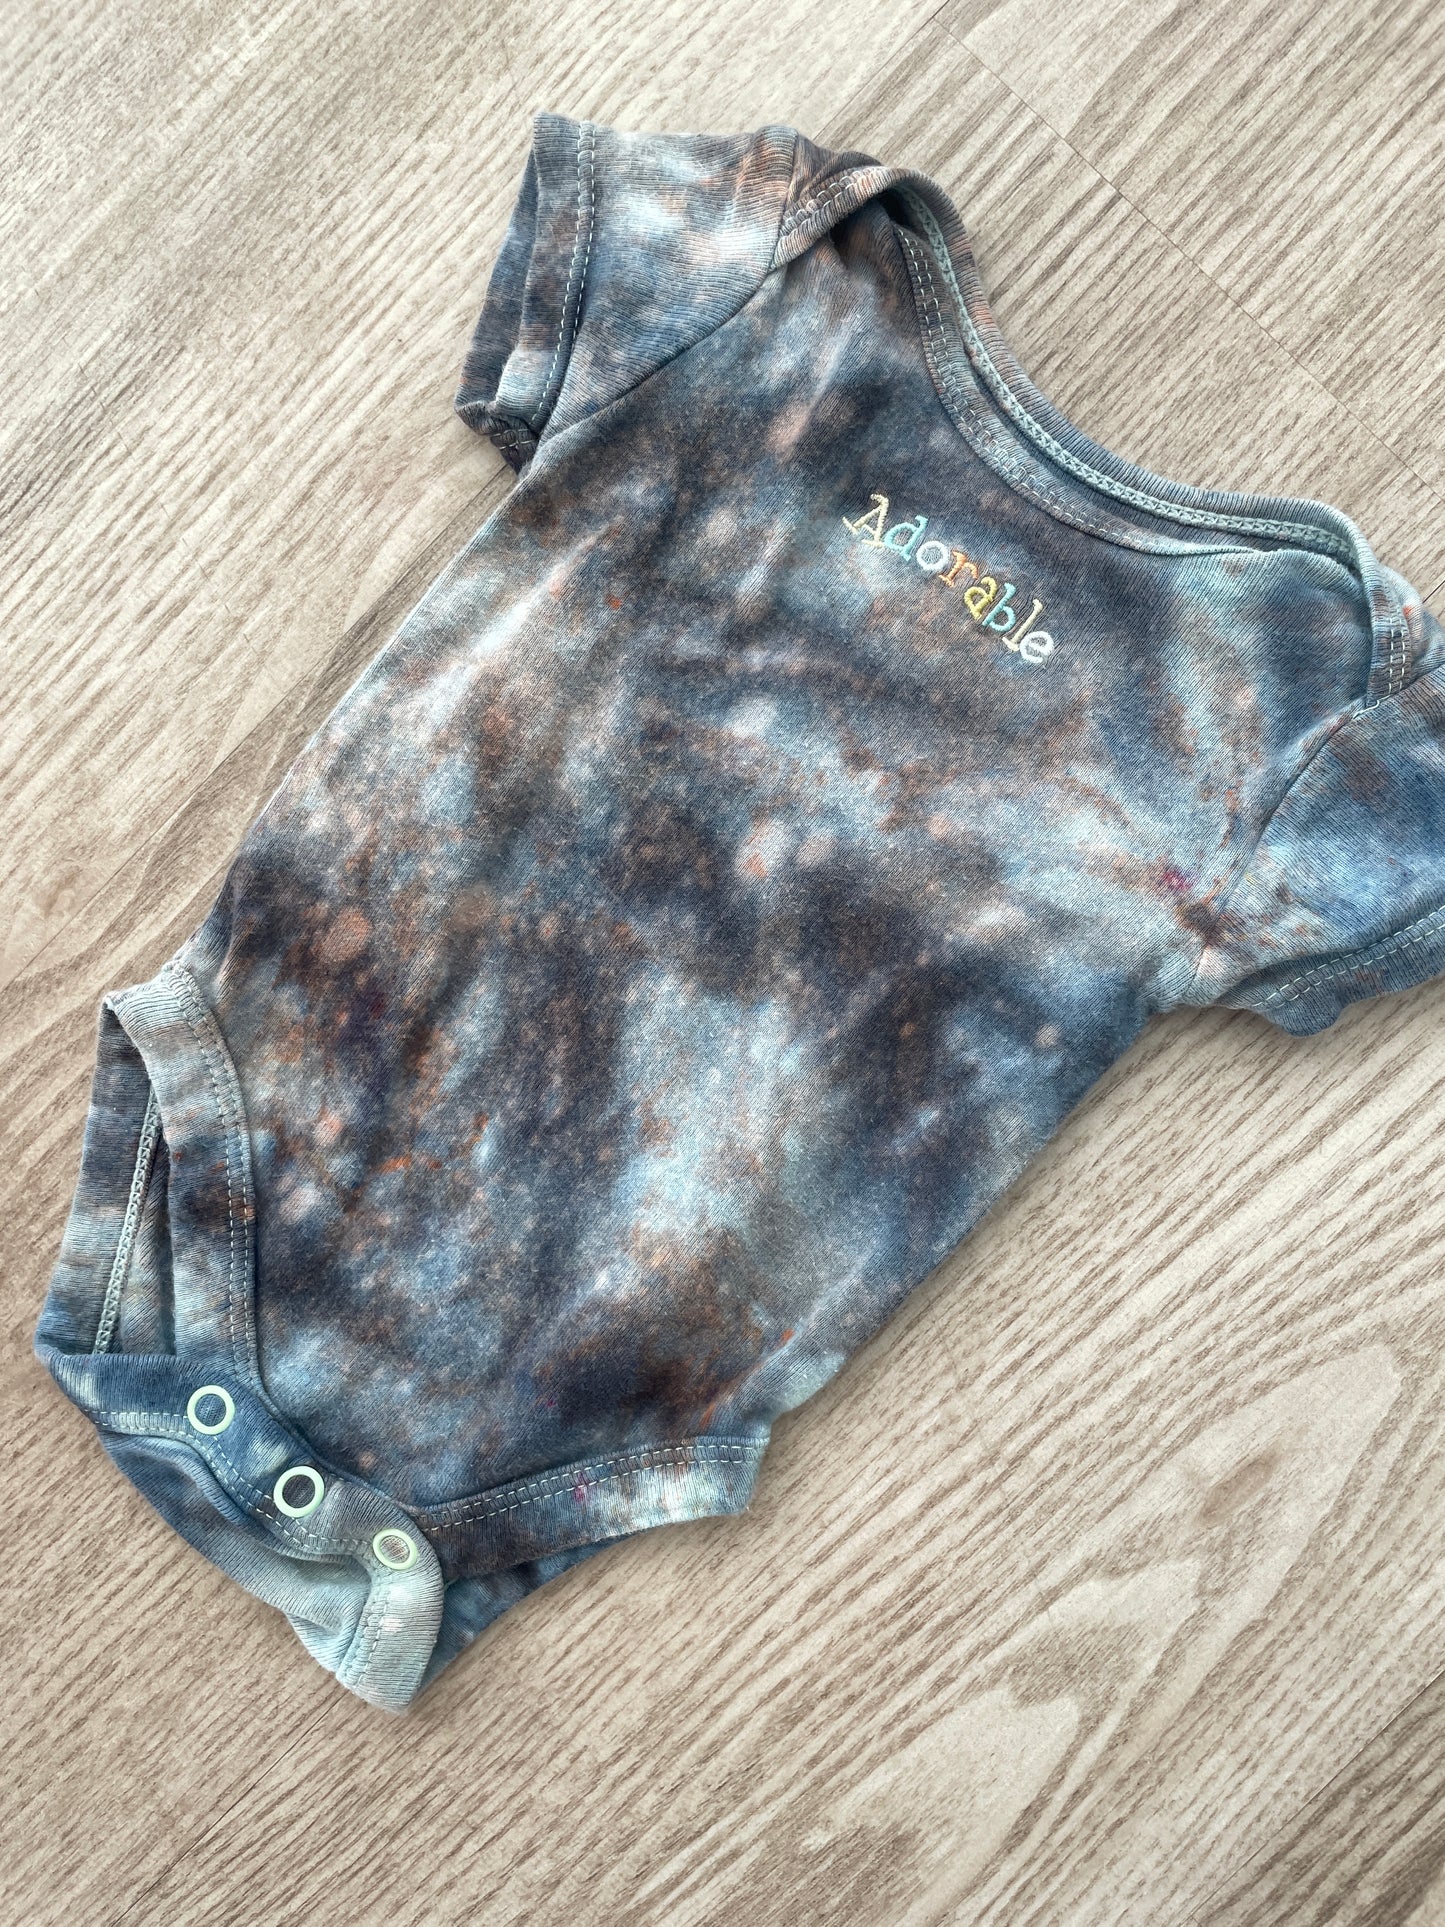 0-3 Months "Adorable" Embroidered Short Sleeve Baby Onesie | Handmade, Upcycled Tie Dye Cotton Onesie | Gray Galaxy Ice Dyed Baby Clothing